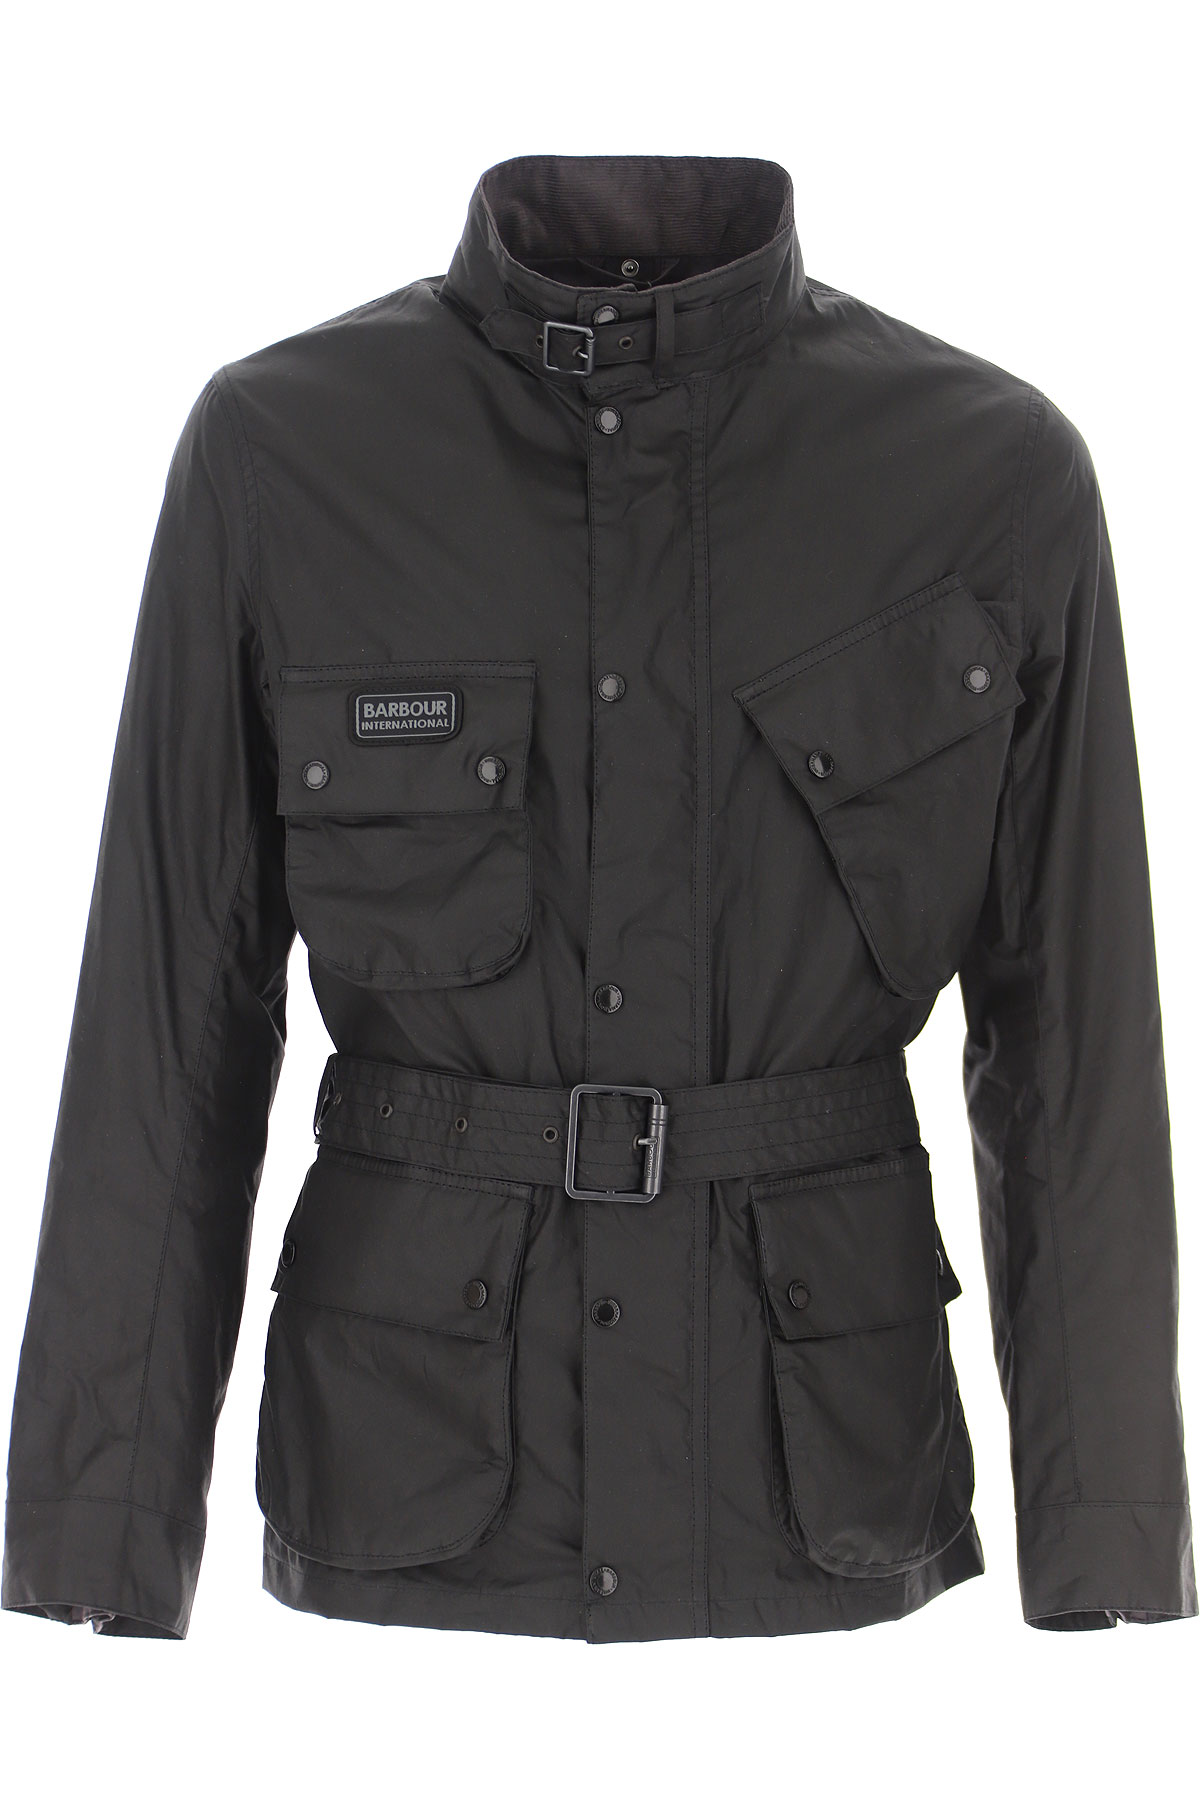 Mens Clothing Barbour, Style code: mwx1784-bk11-